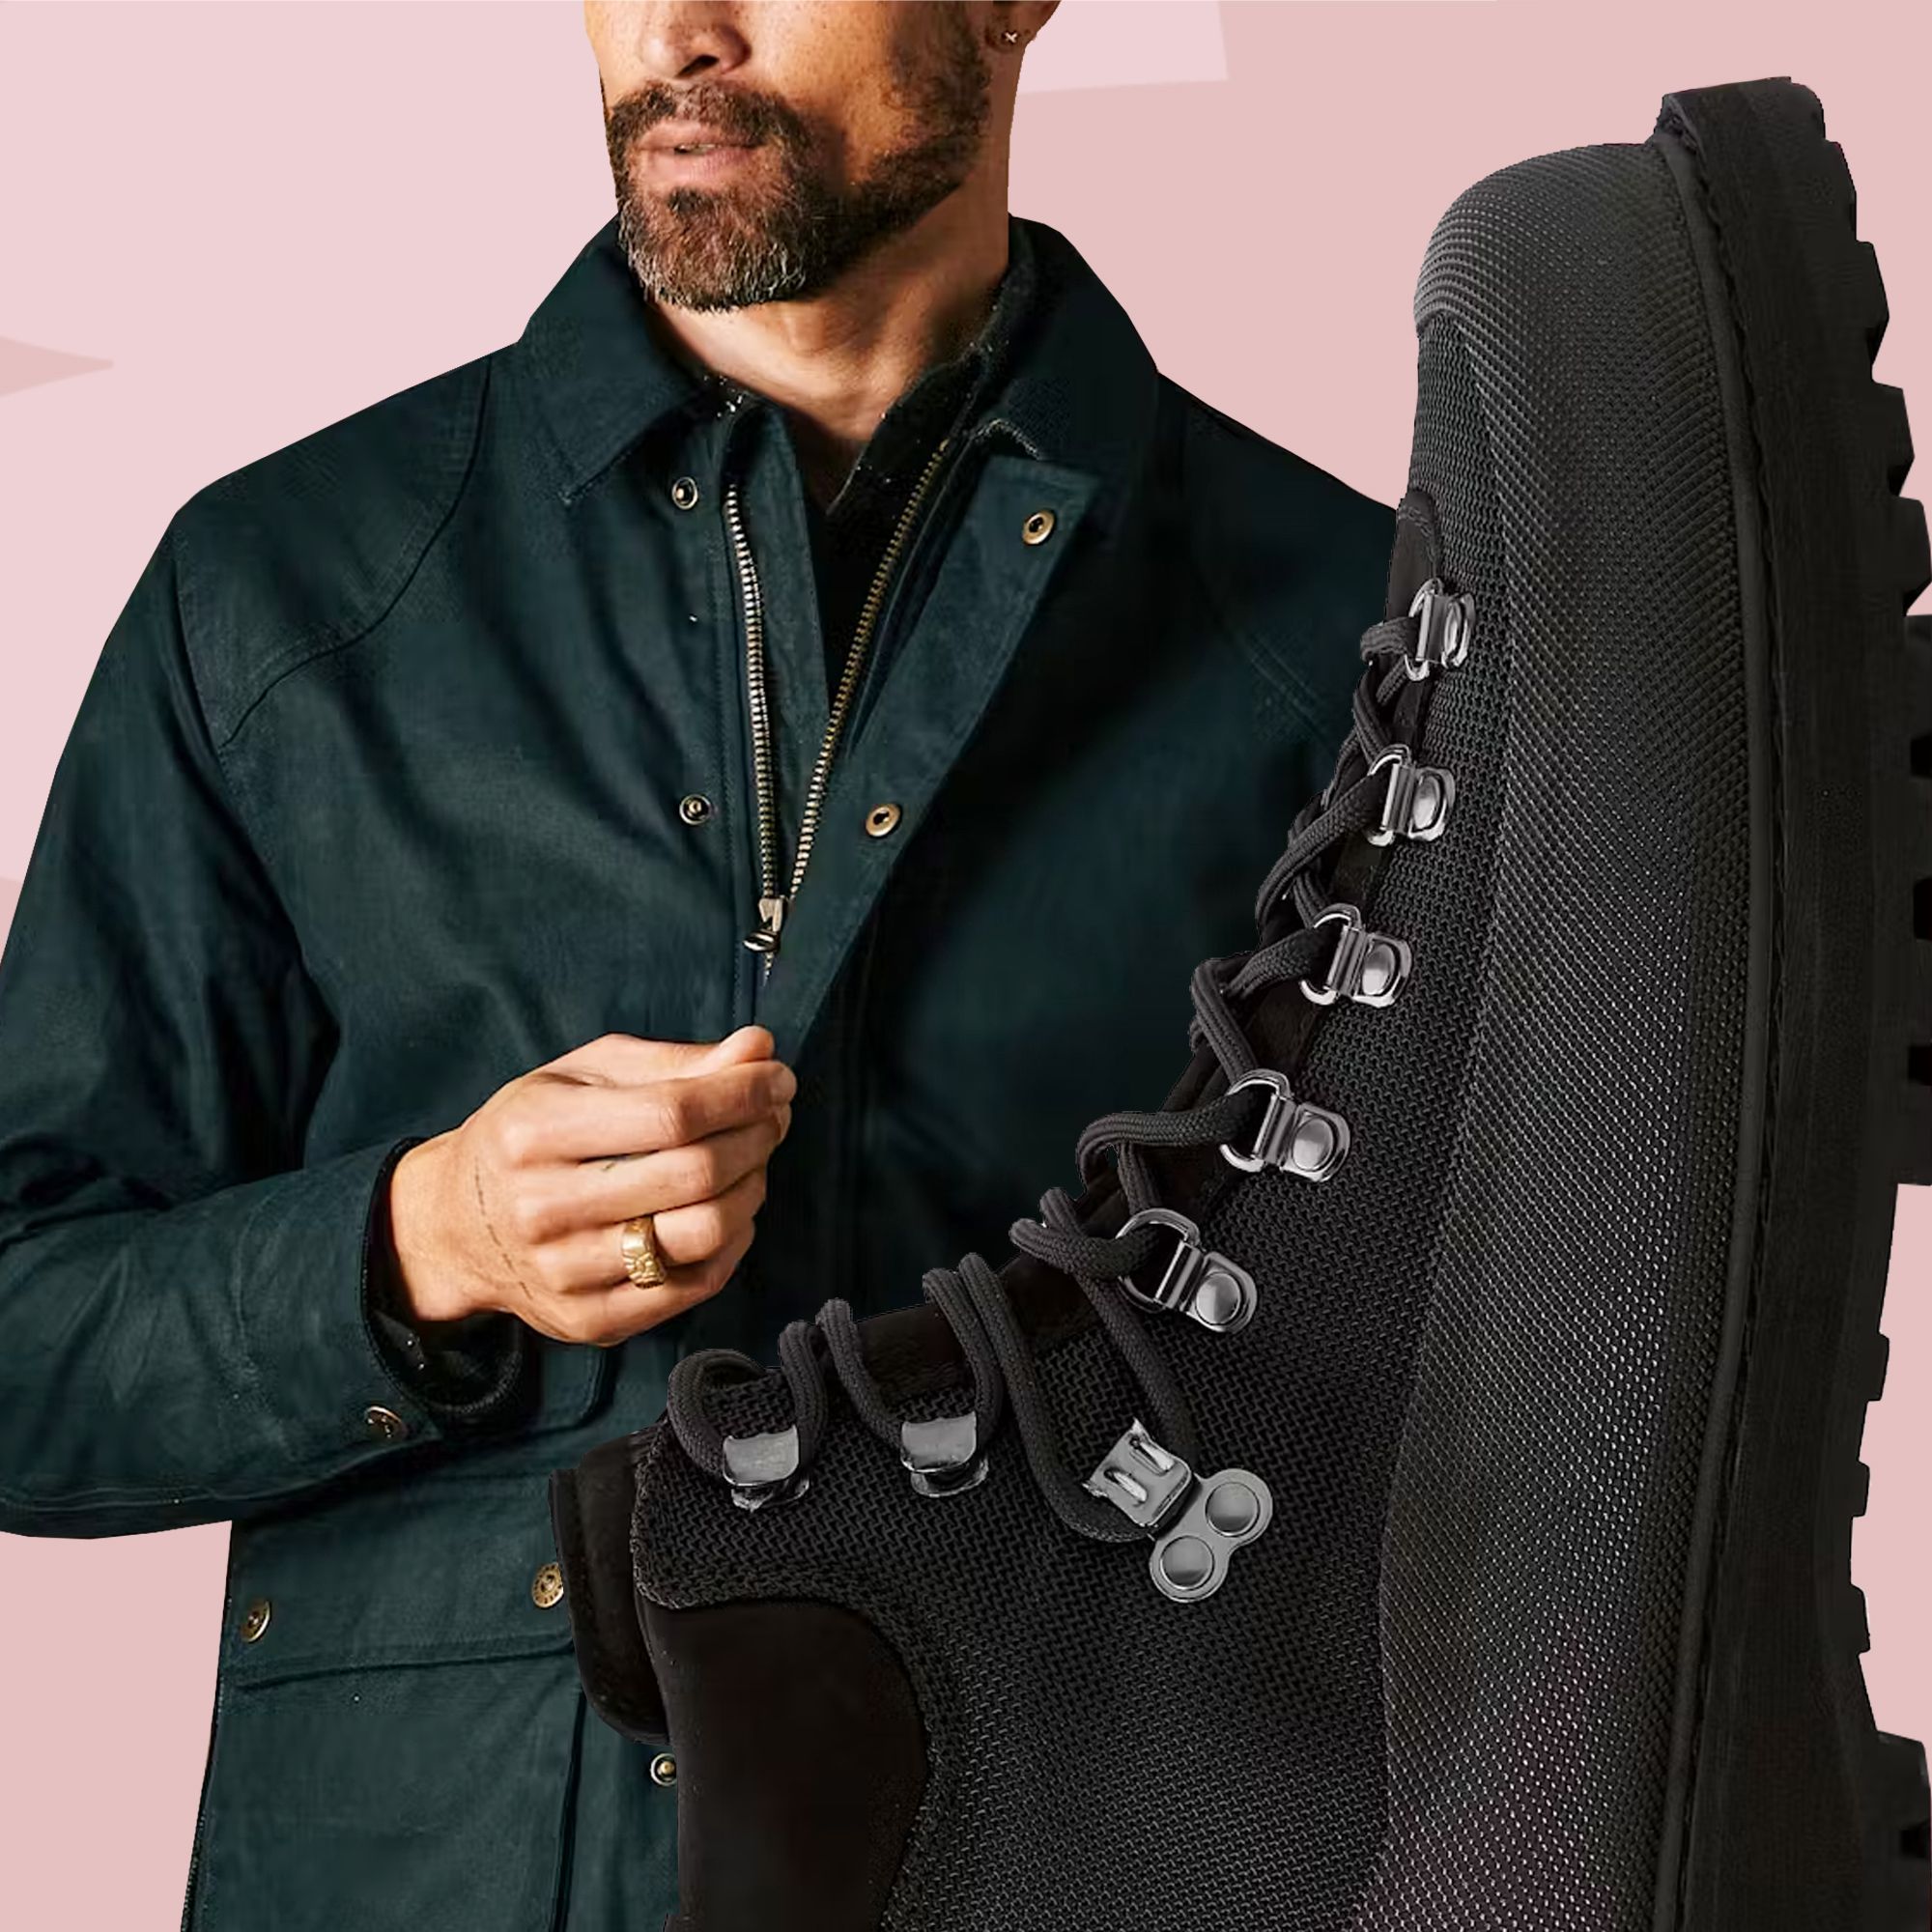 Huckberry's Sale Is the Best Thing We've Seen All Week